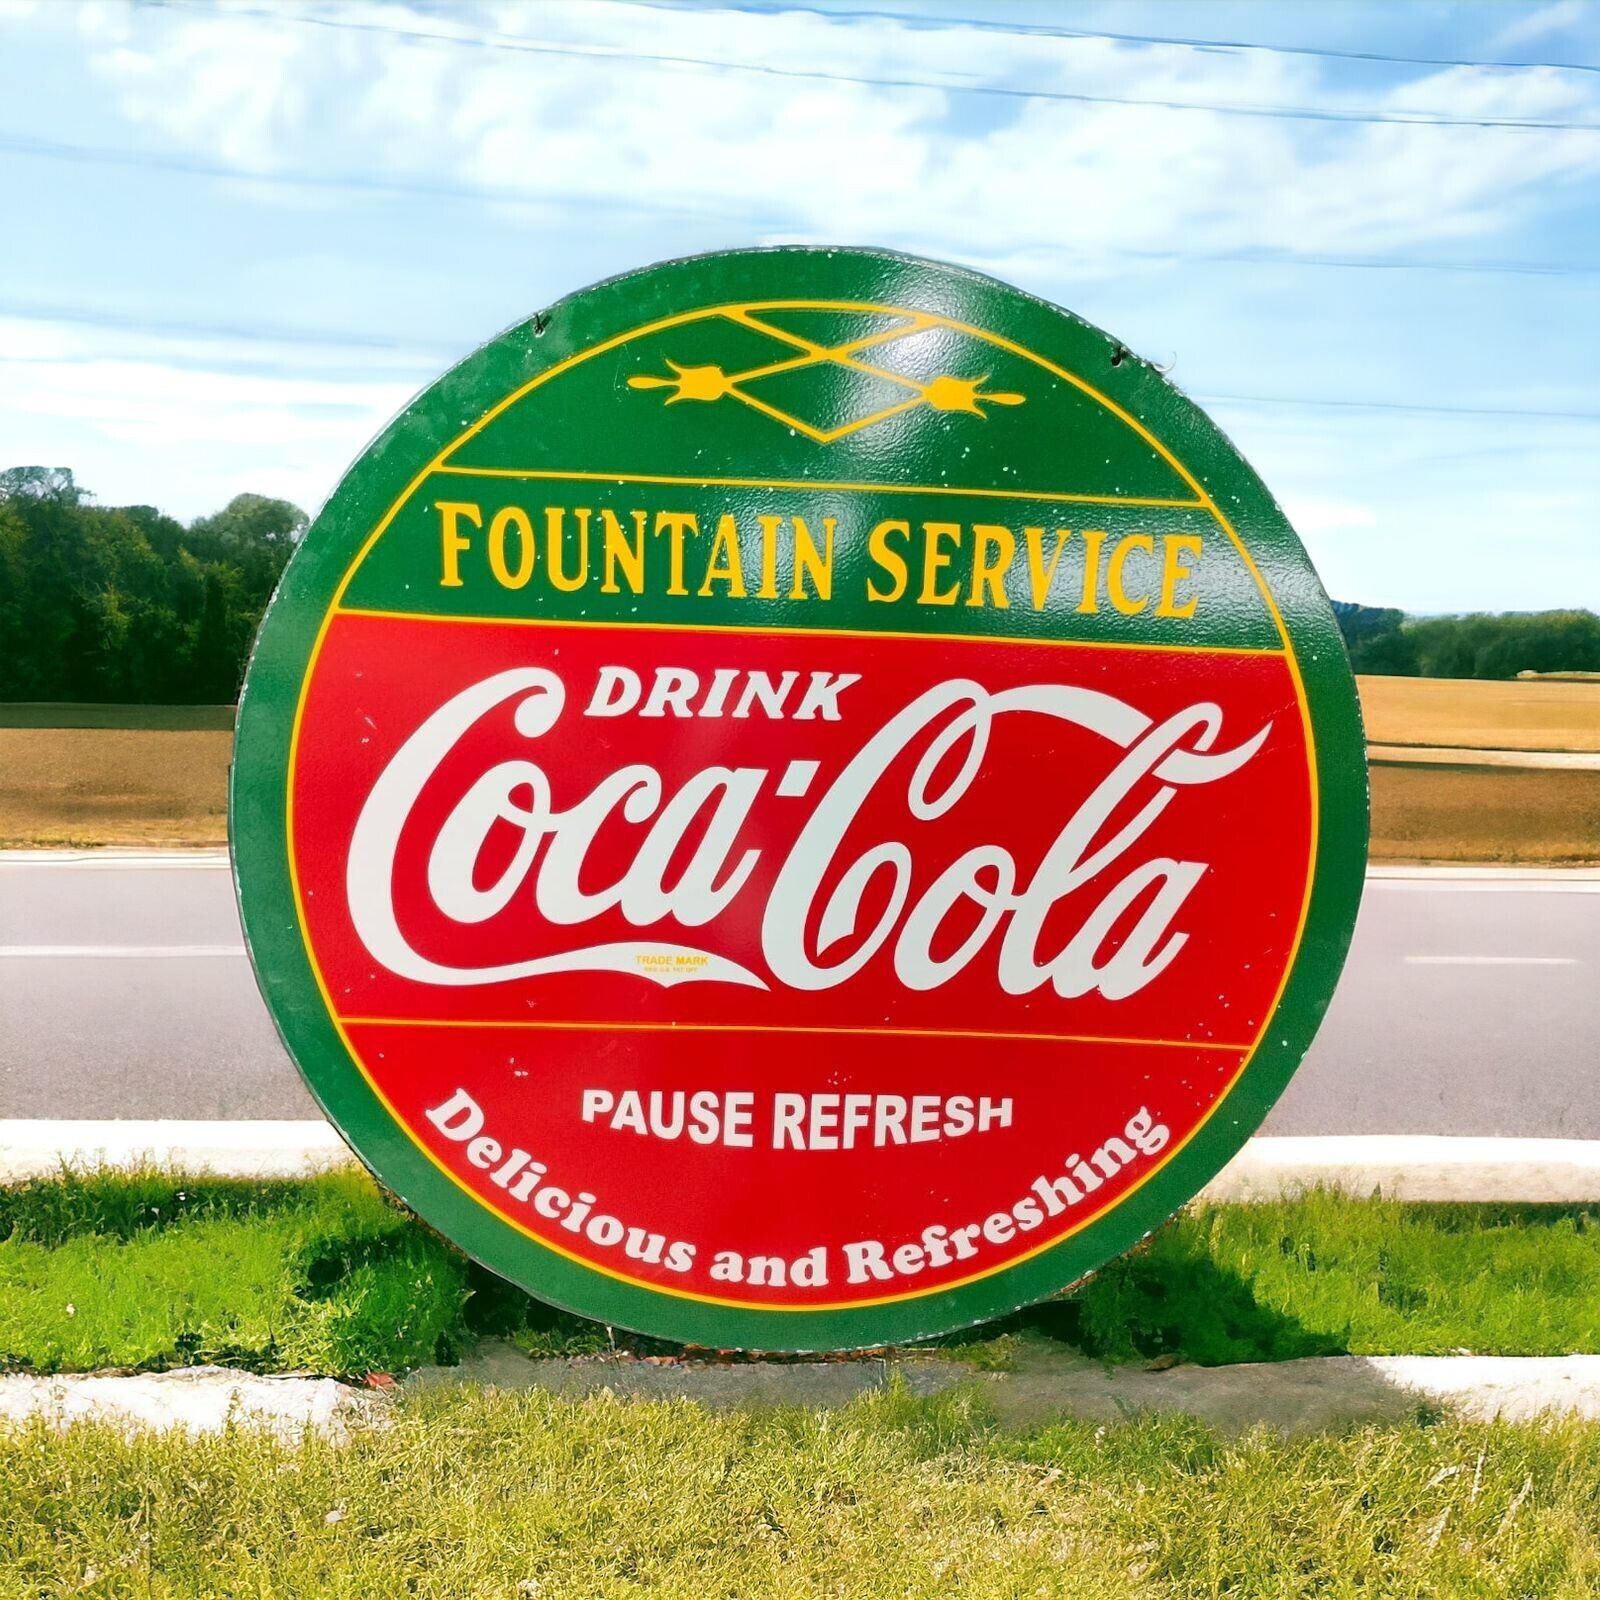 COCA COLA FOUNTAIN SERVICE  PORCELAIN ENAMEL  SIGN  48 INCHES 4 FEET  DSP SIGN